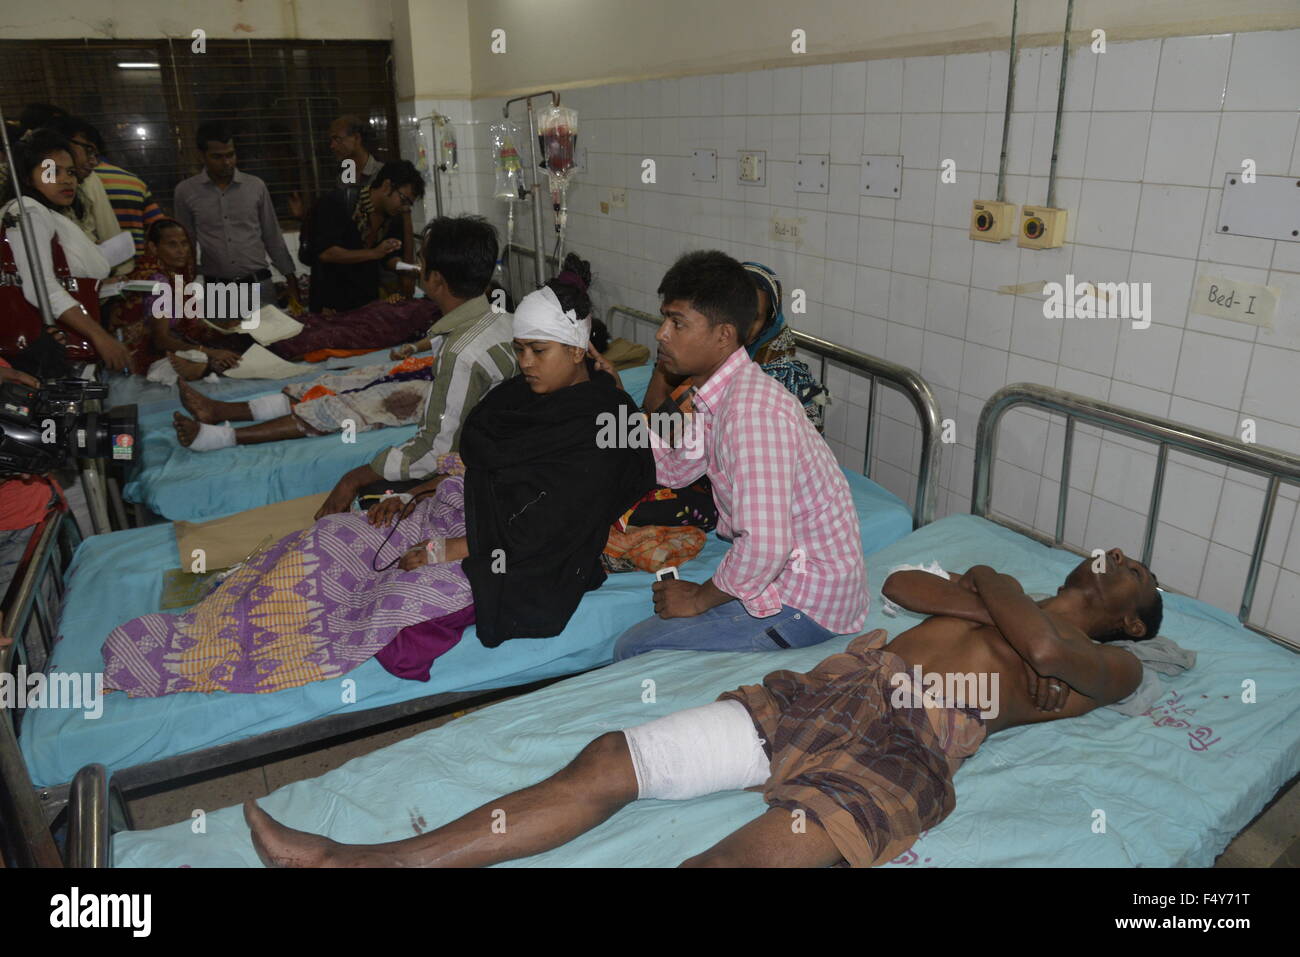 An injured Shiite Muslim is seen in Dhaka medical college hospital after  bomb exploded outside Bangladesh capital's main Shia religious site in Dhaka. On October 24, 2015 At least one person was killed and over 60 injured in a bomb attack outside the main Shiite site in the Bangladeshi capital, as thousands gathered for the annual Ashura procession. Stock Photo